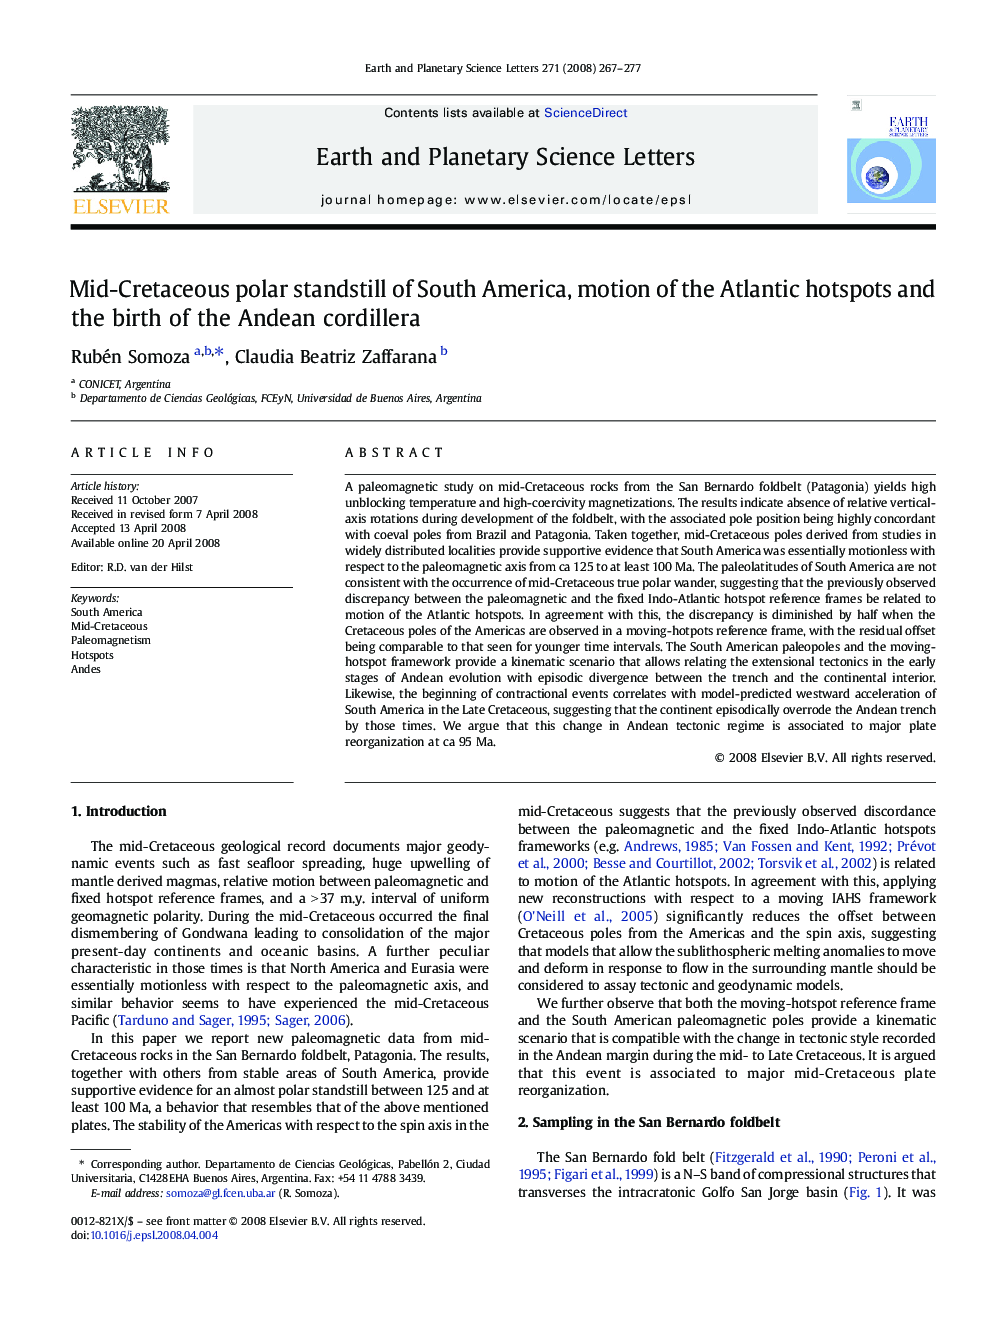 Mid-Cretaceous polar standstill of South America, motion of the Atlantic hotspots and the birth of the Andean cordillera